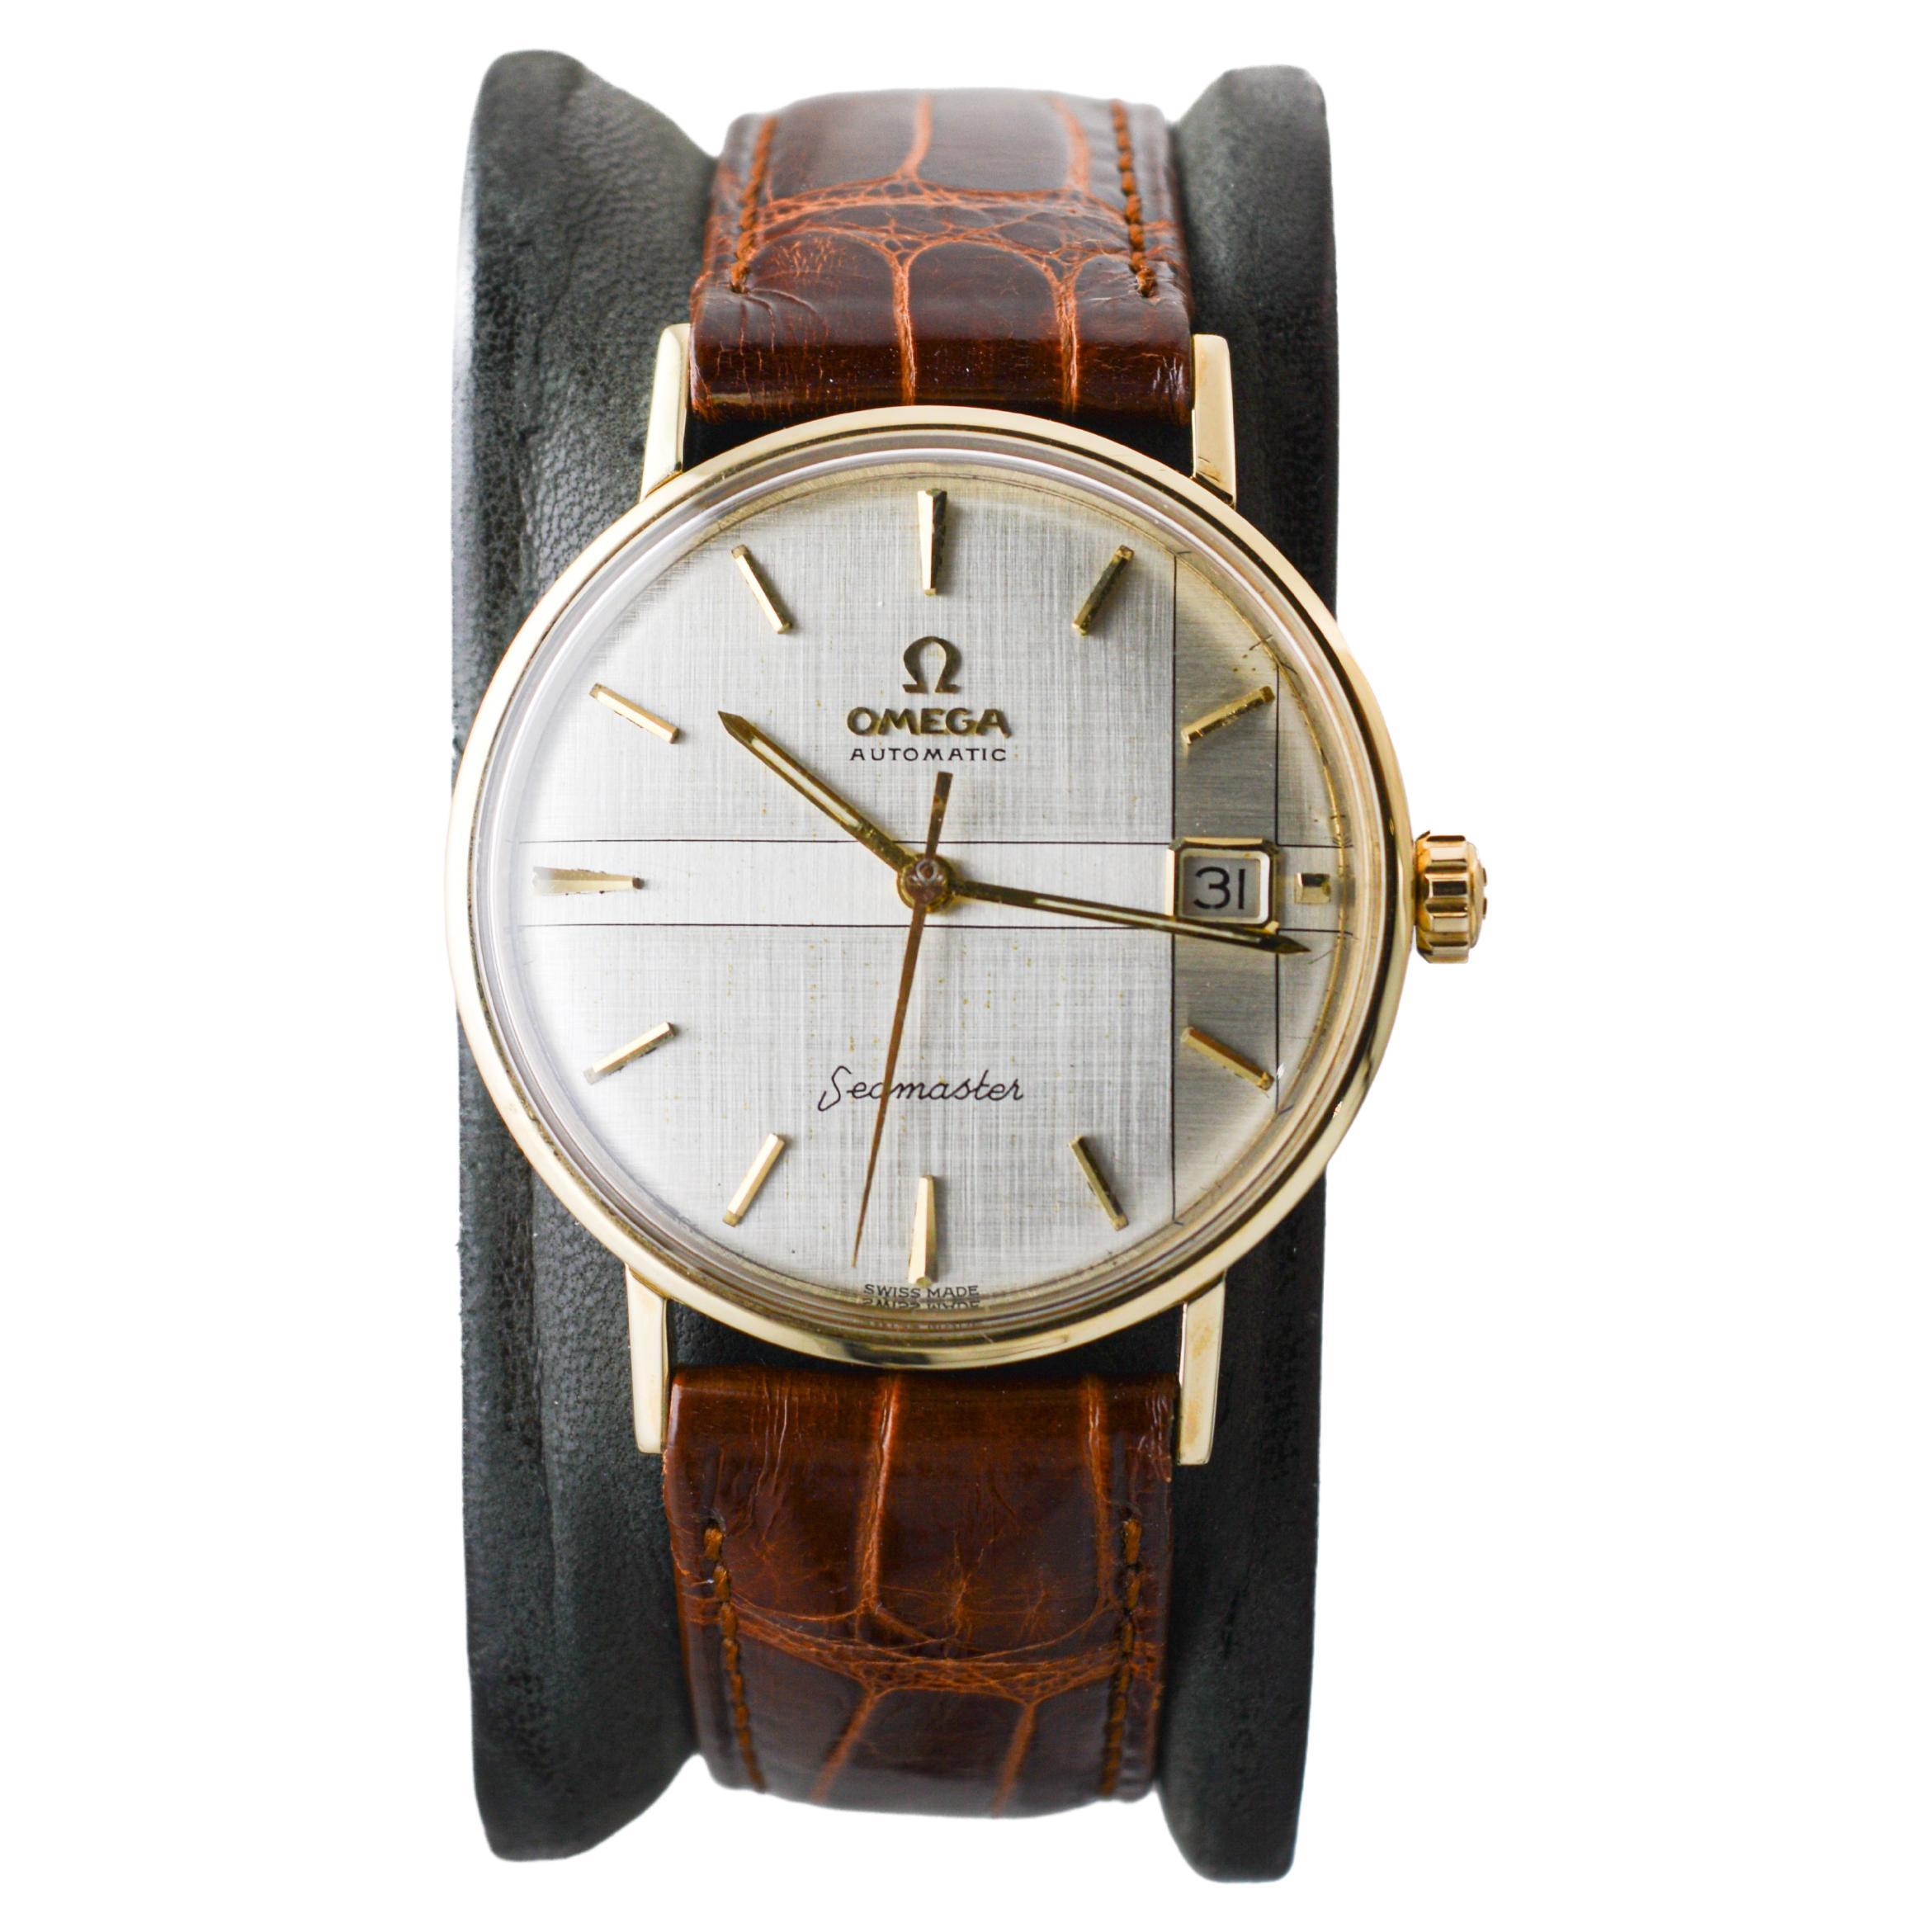 FACTORY / HOUSE: Omega Watch Company
STYLE / REFERENCE: Seamaster Automatic
METAL / MATERIAL: 14Kt. Solid Yellow Gold
DIMENSIONS: Length 40mm X Diameter 34mm
CIRCA: 1962 
MOVEMENT / CALIBER: Automatic Winding / 17 Jewels / 560
DIAL / HANDS: Original